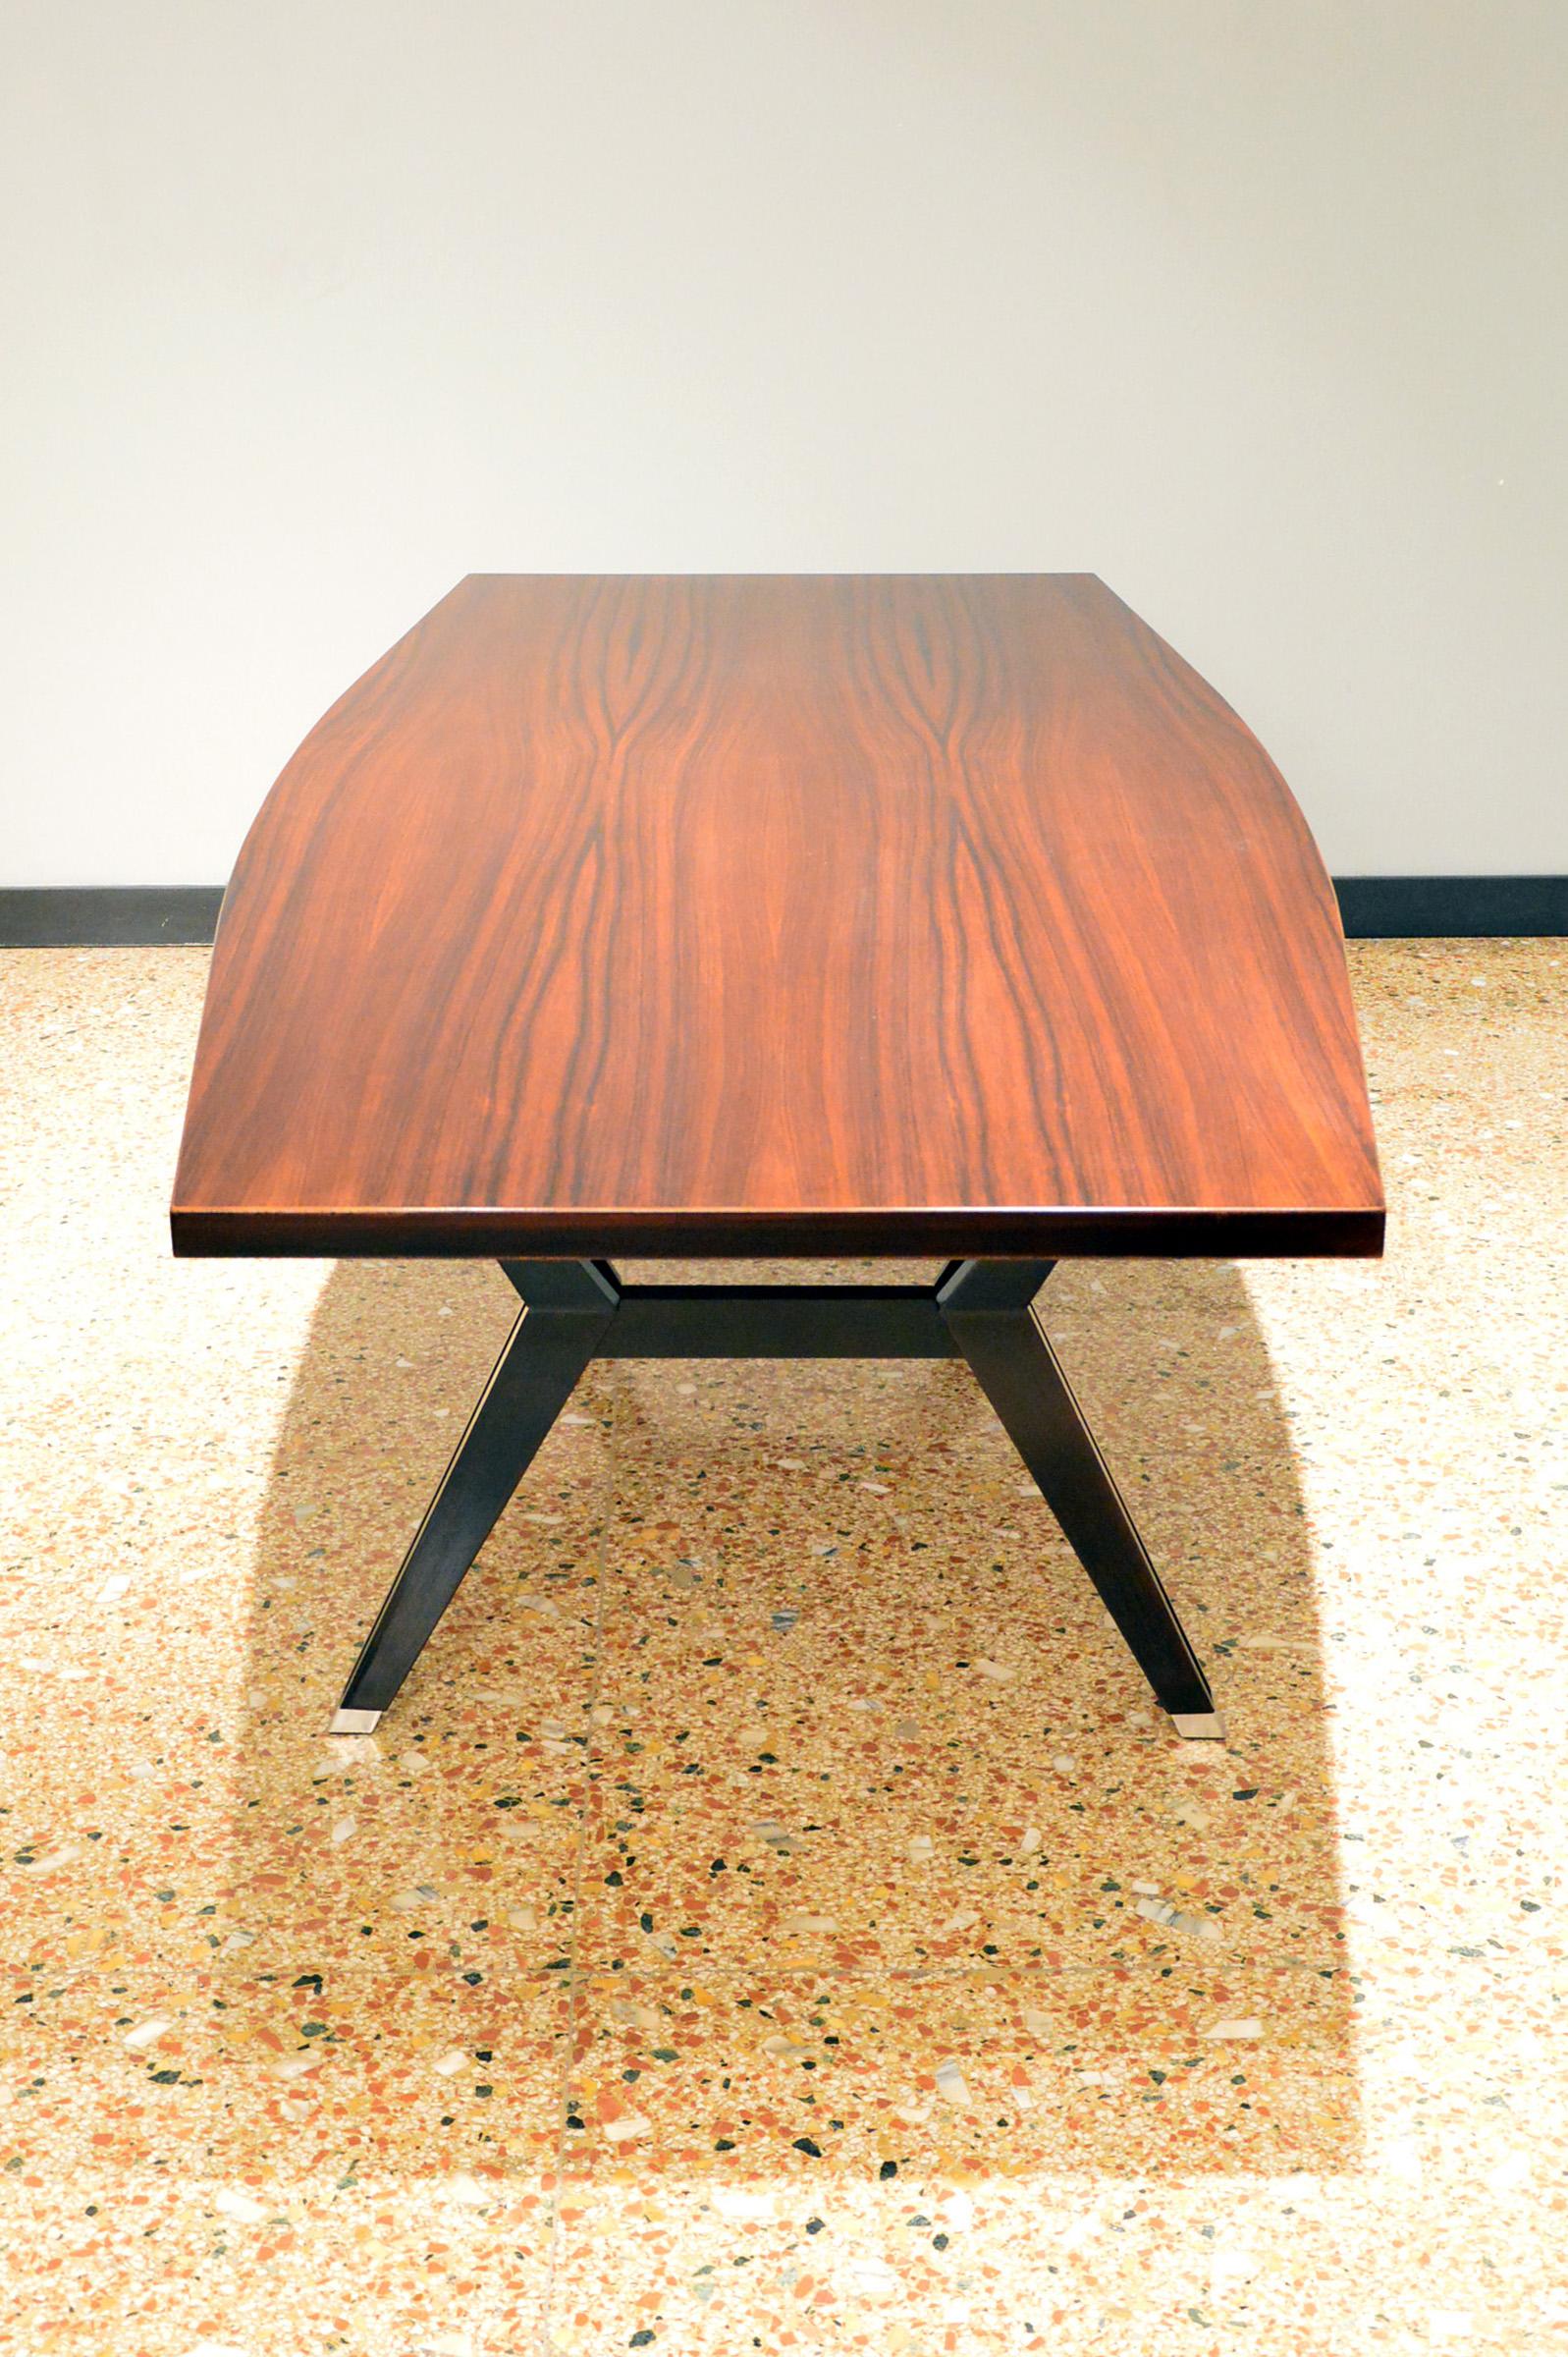 Italian Tolomeo Rosewood Dining or Meeting Table by Ico Parisi and Ennio Fazioli for Mim